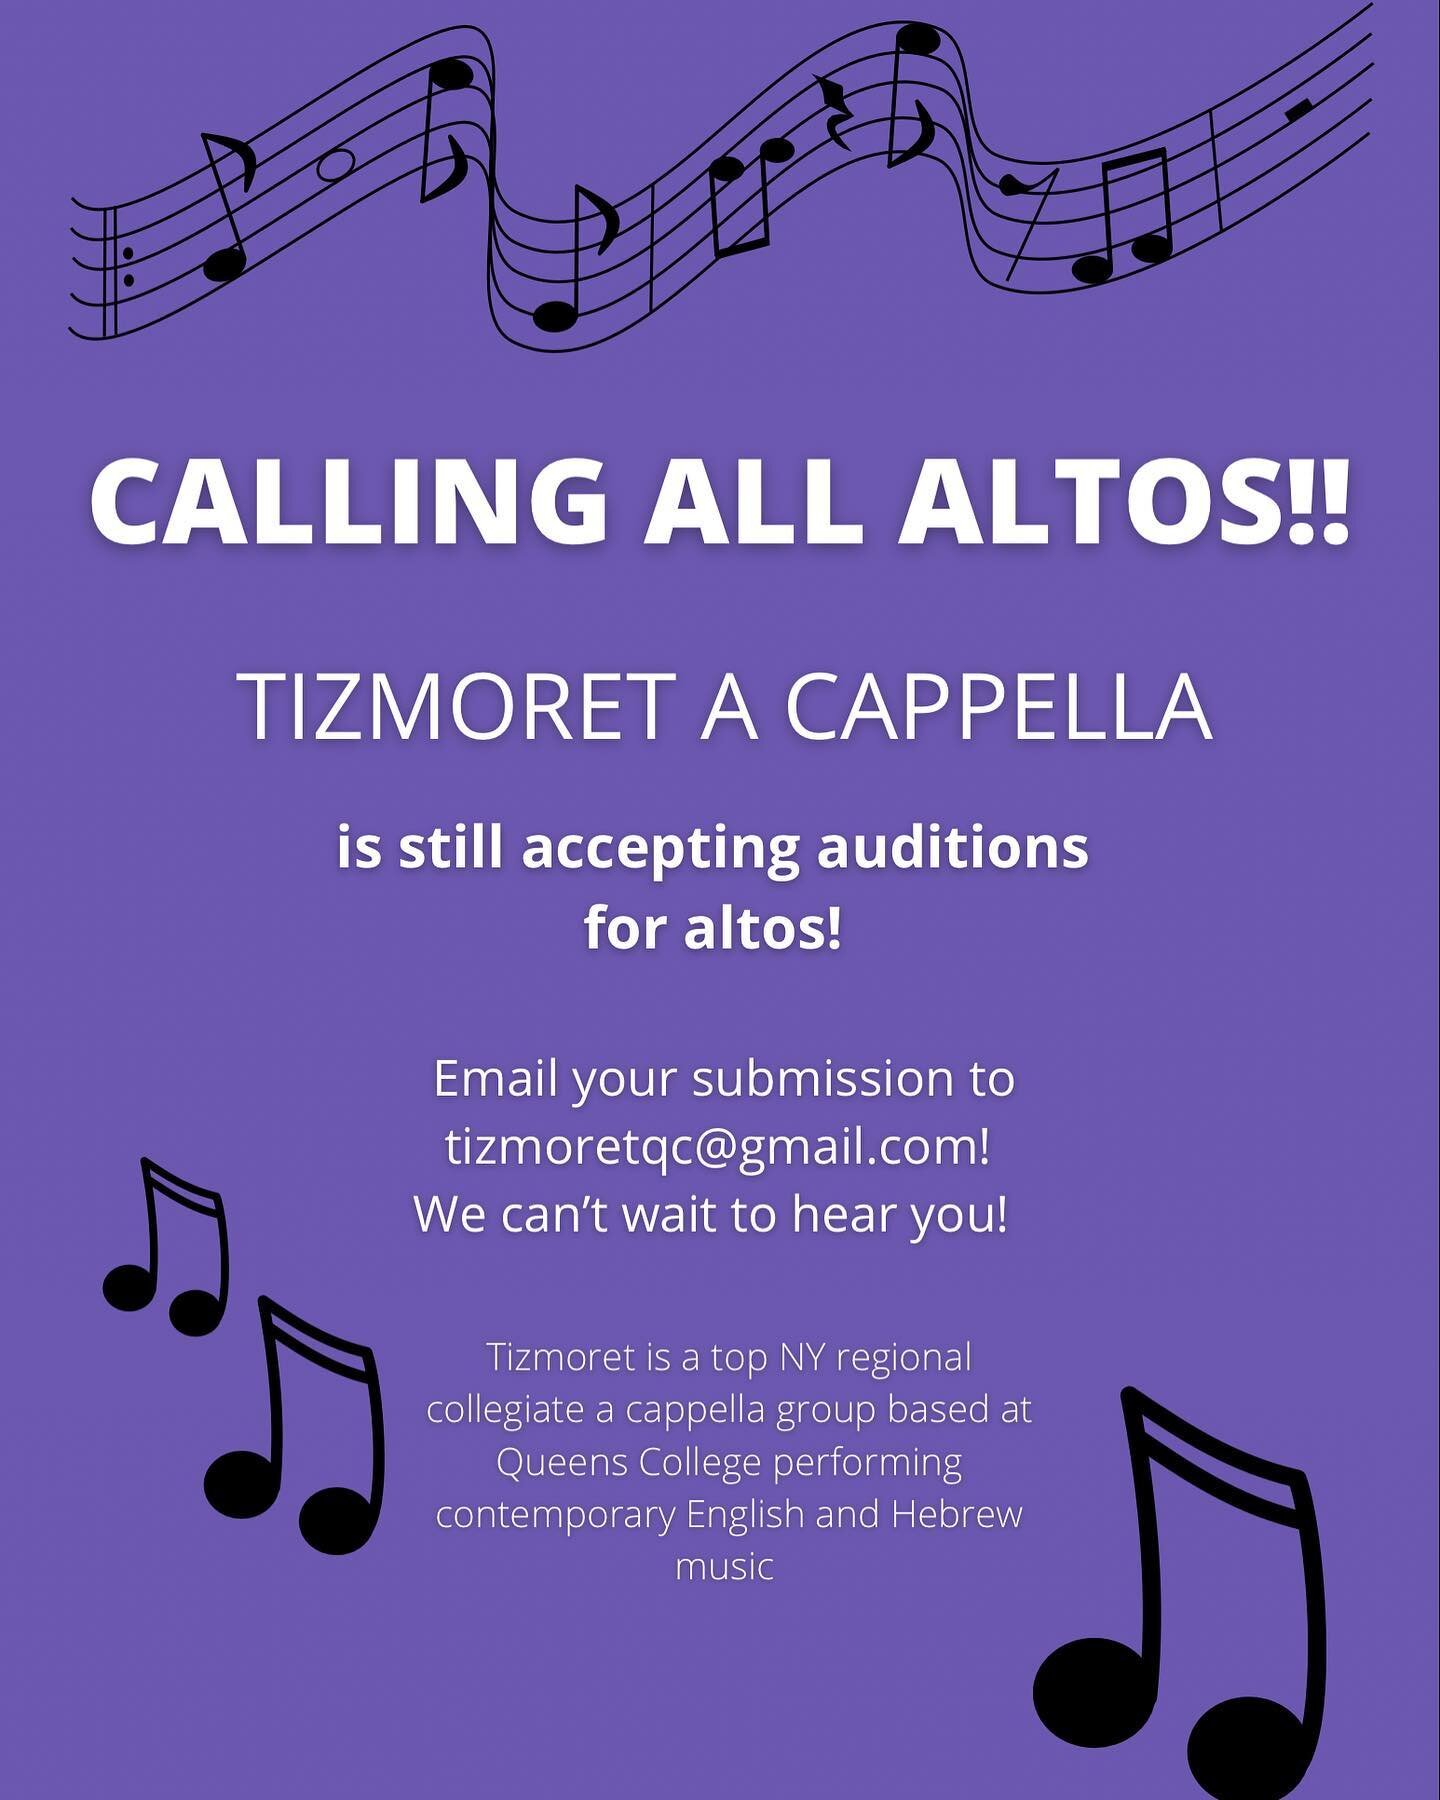 Tell your friends!!! Spread the word!!! We still have a few alto spots left!! Email your submissions to tizmoretqc@gmail.com!!